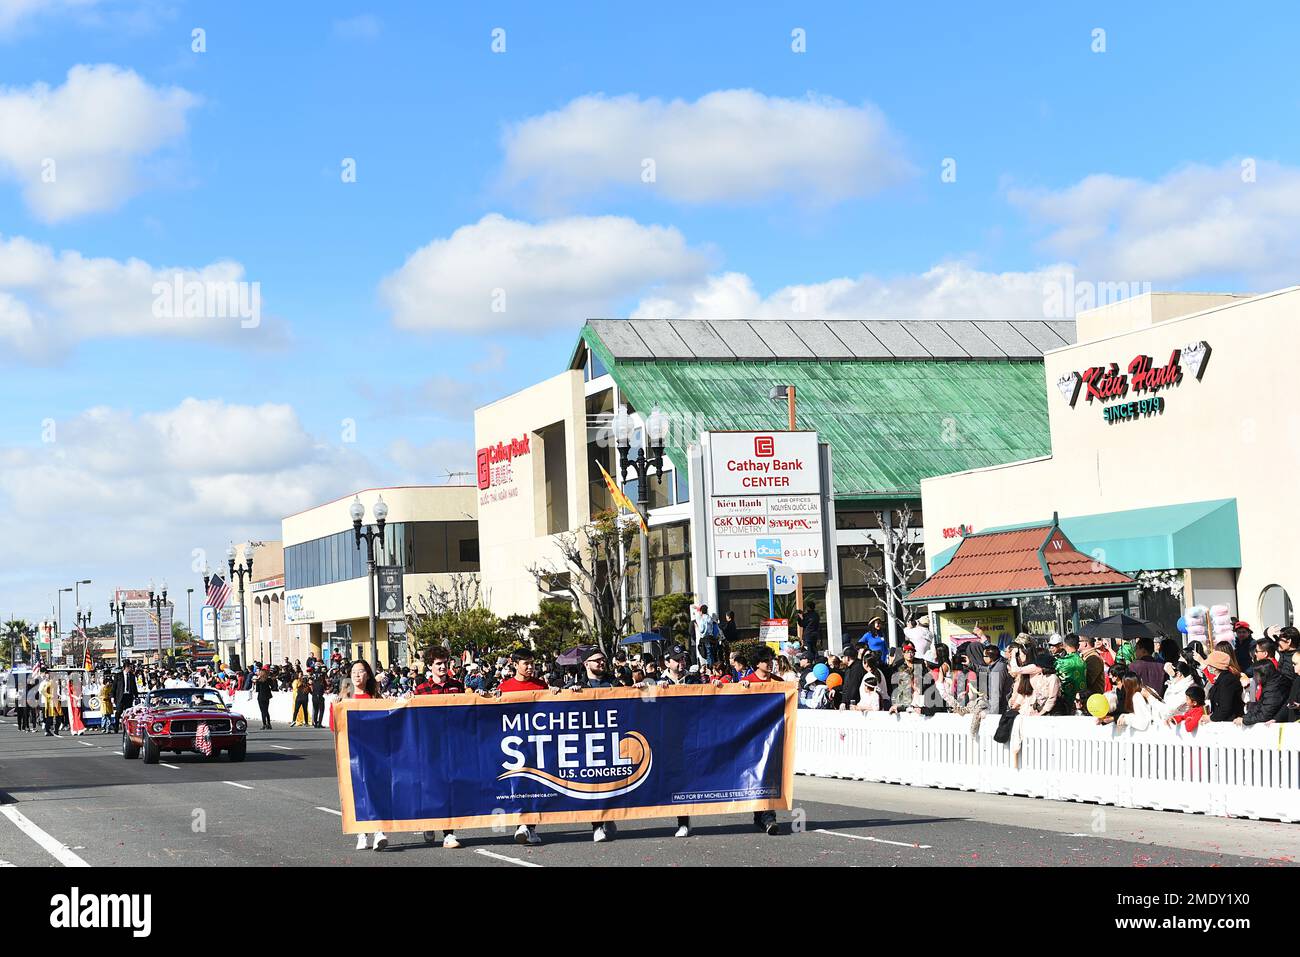 WESTMINSTER, CALIFORNIA - 22 JAN 2023: Banner for Congresswoman Michelle Steele at the Tet Parade Celebrating the Year of the Cat. Stock Photo